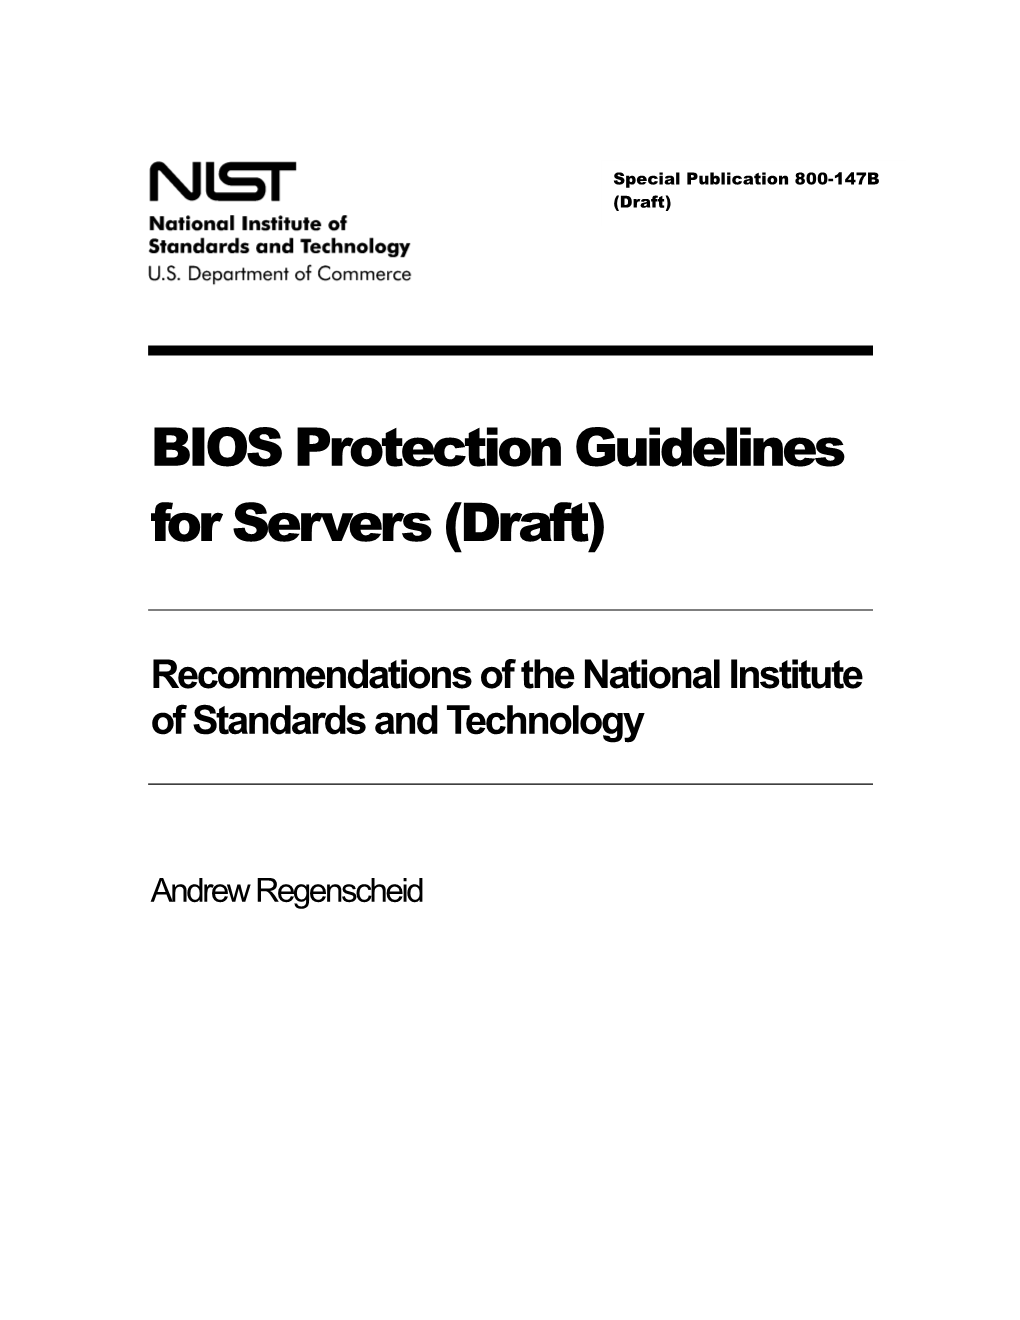 BIOS Protection Guidelines for Servers (Draft)